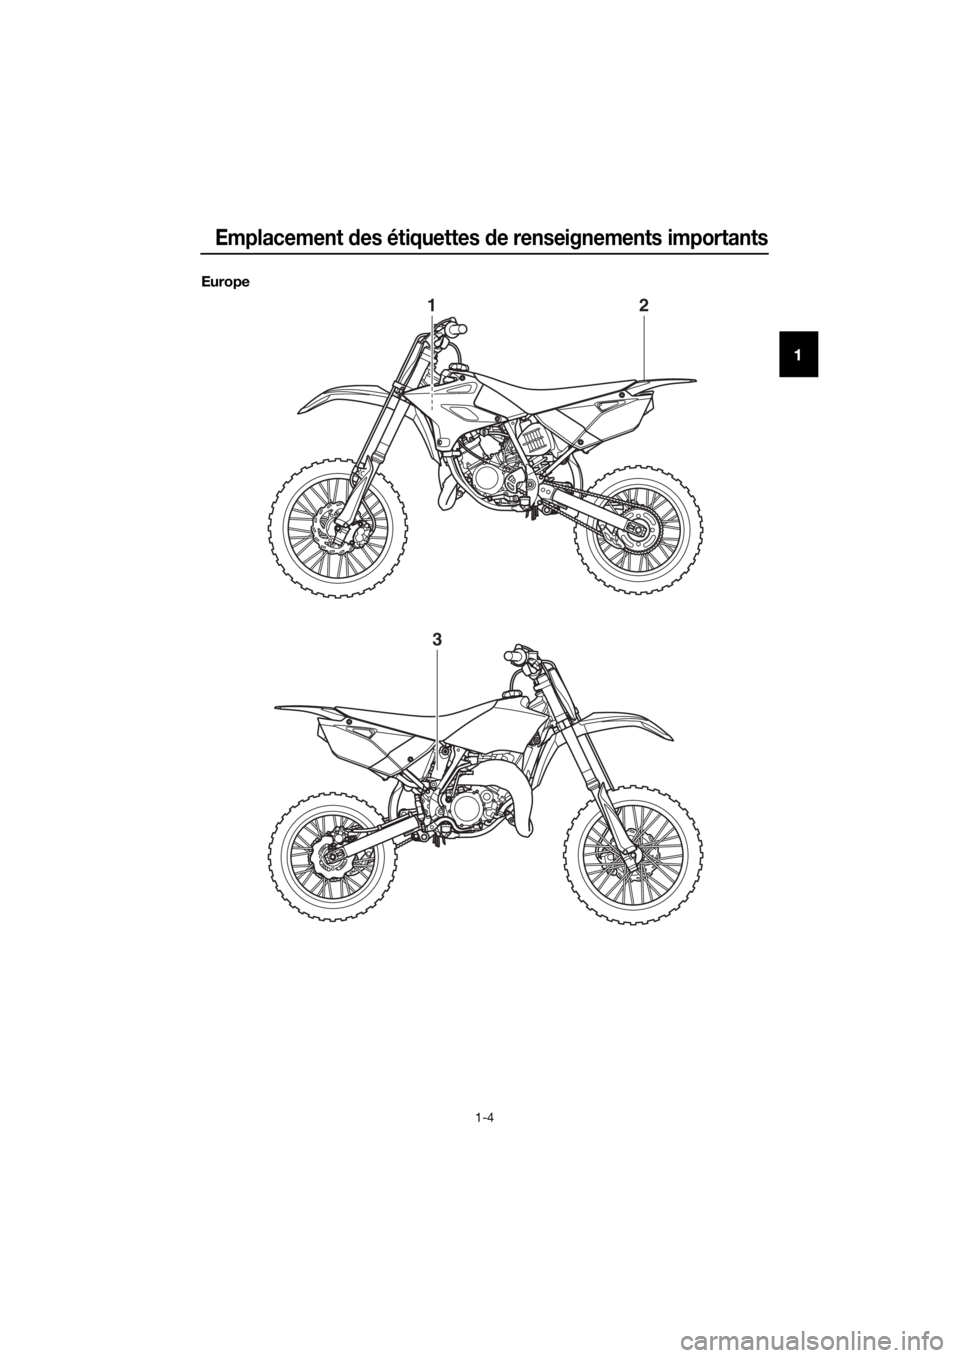 YAMAHA YZ85 2020  Notices Demploi (in French) Emplacement des étiquettes  de renseignements importants
1-4
1
Europe
12
3
UB4B81F0.book  Page 4  Friday, February 22, 2019  2:45 PM 